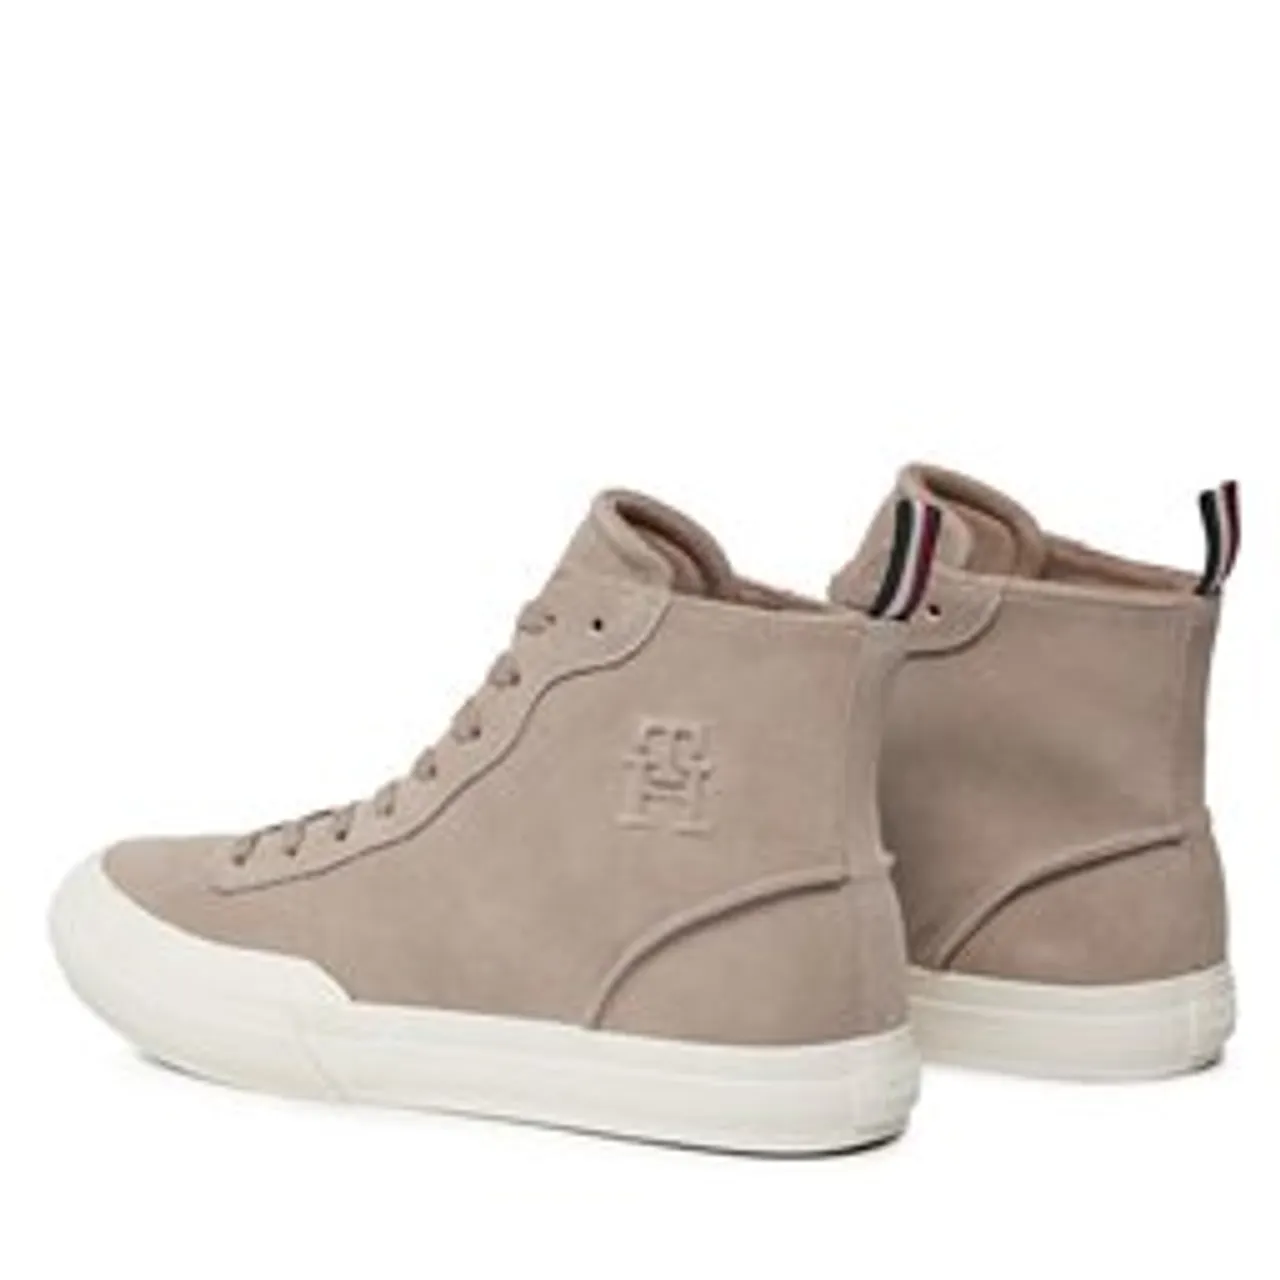 Sneakers Tommy Hilfiger Th Hi Vulc FM0FM04928 Smooth Taupe PKB